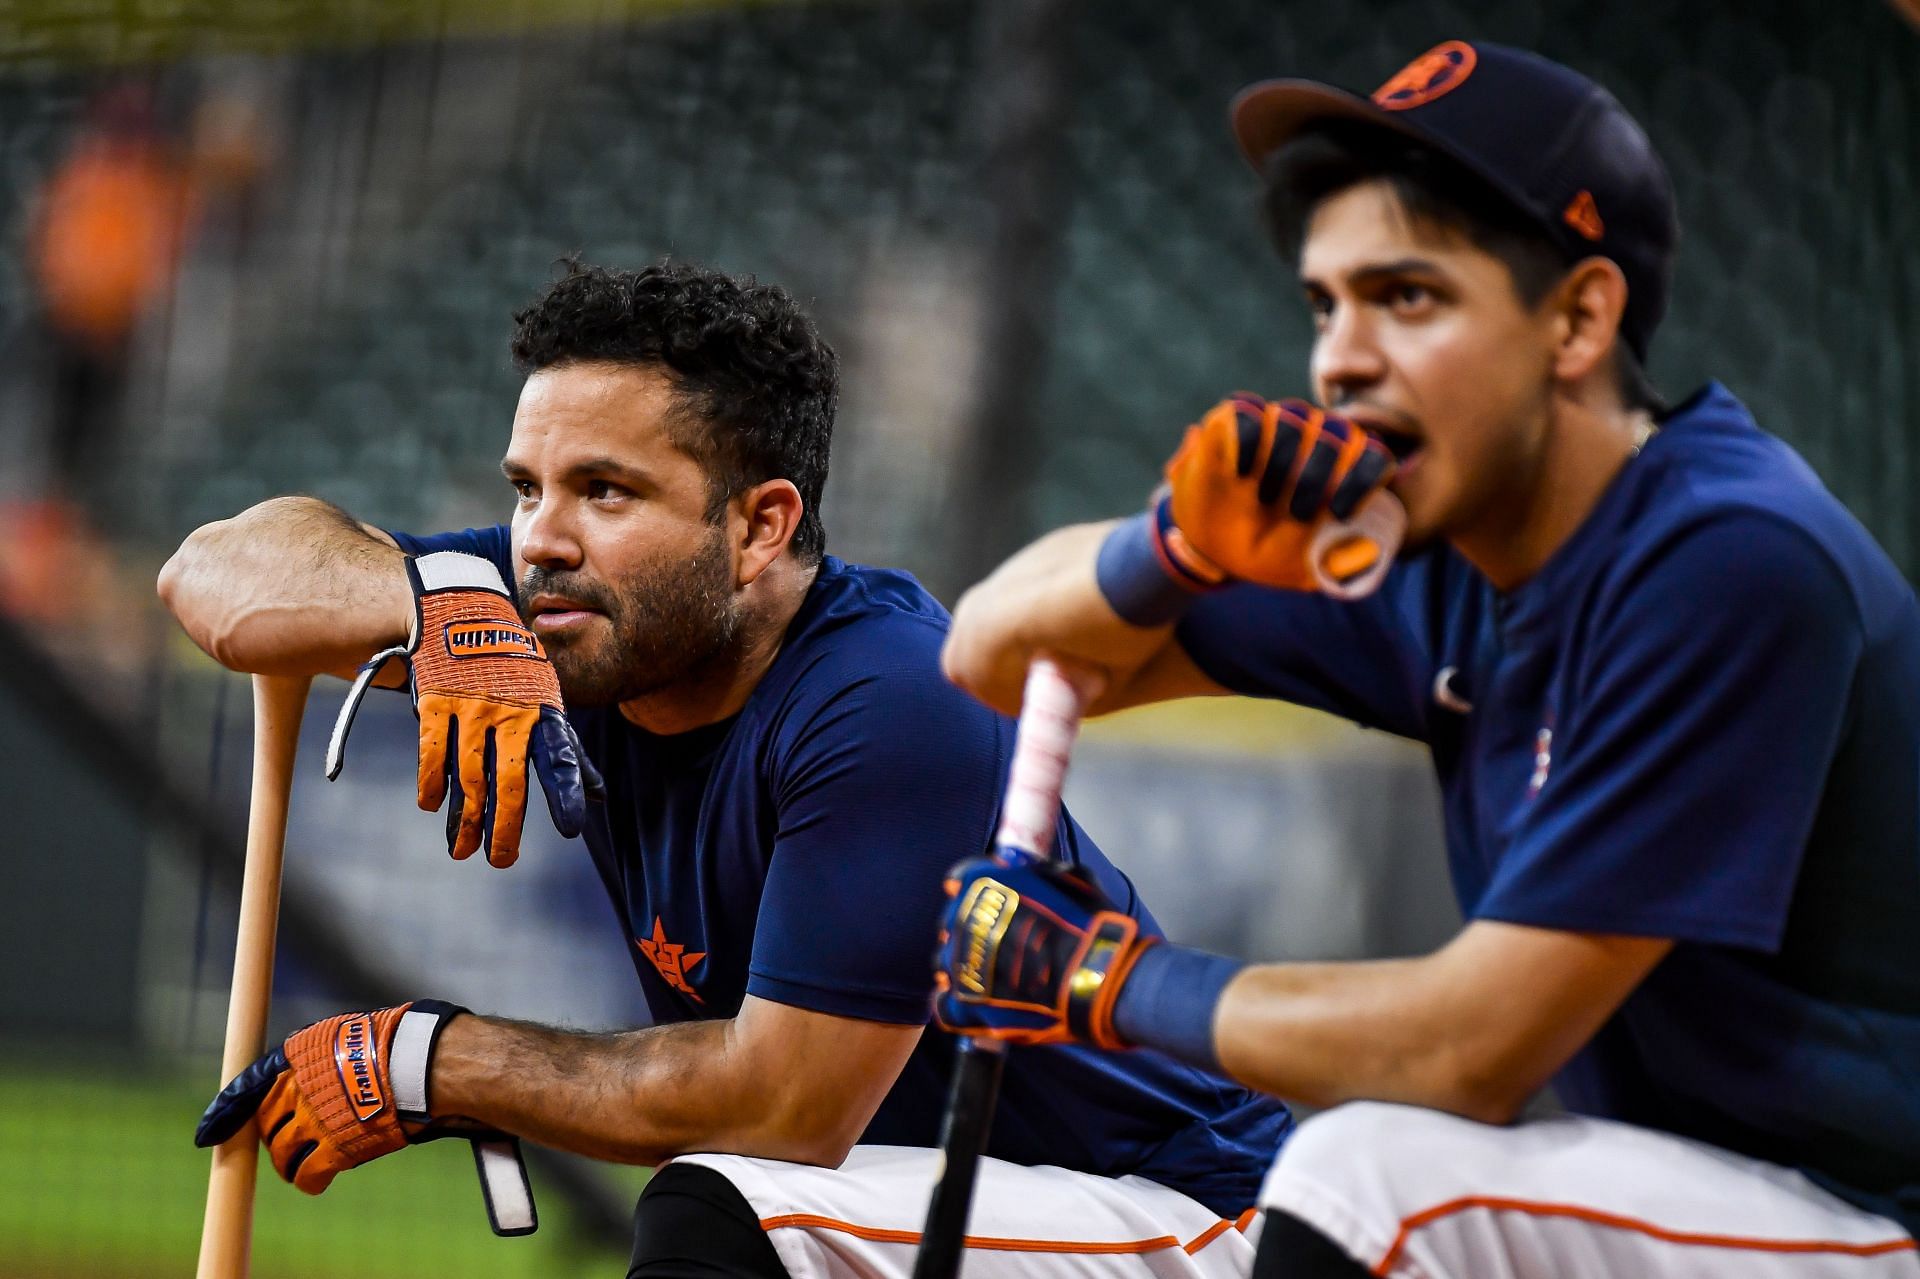 Op-Ed: Baseball may never recover from Astros' cheating scandal